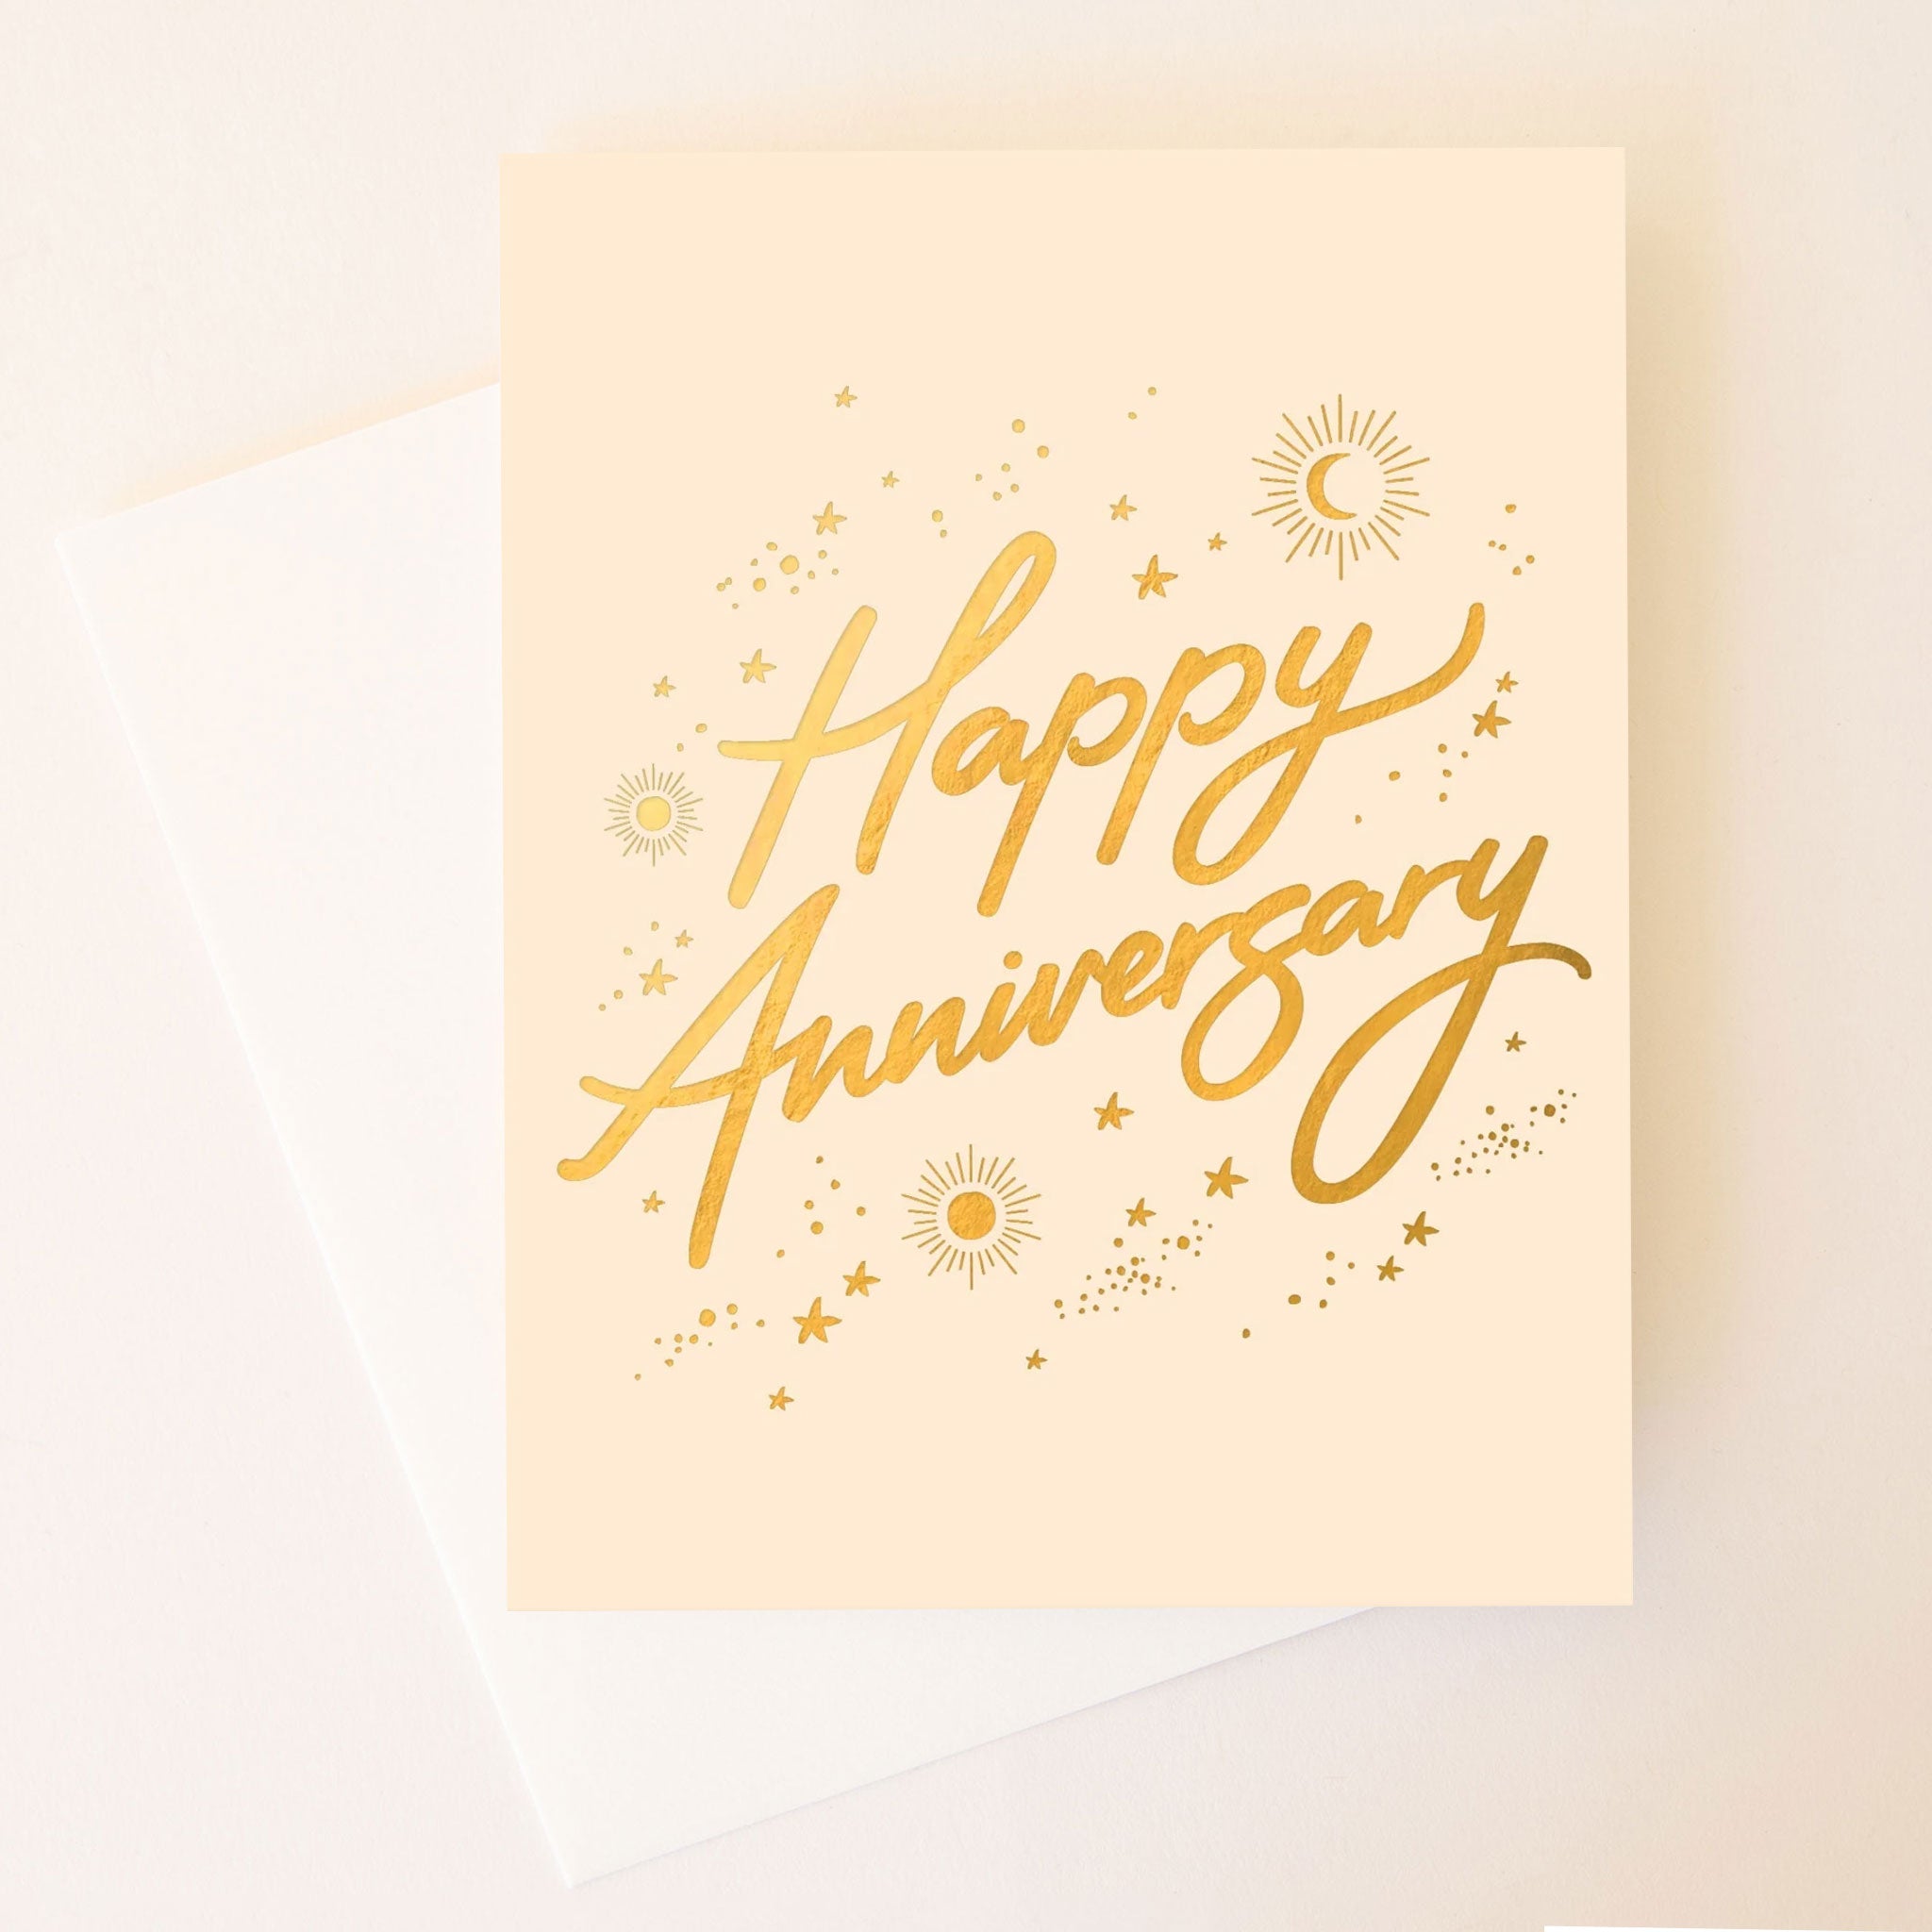 On a neutral background is a tan card with gold foil text that reads, "Happy Anniversary" along with gold foil stars, sun and moons around. 